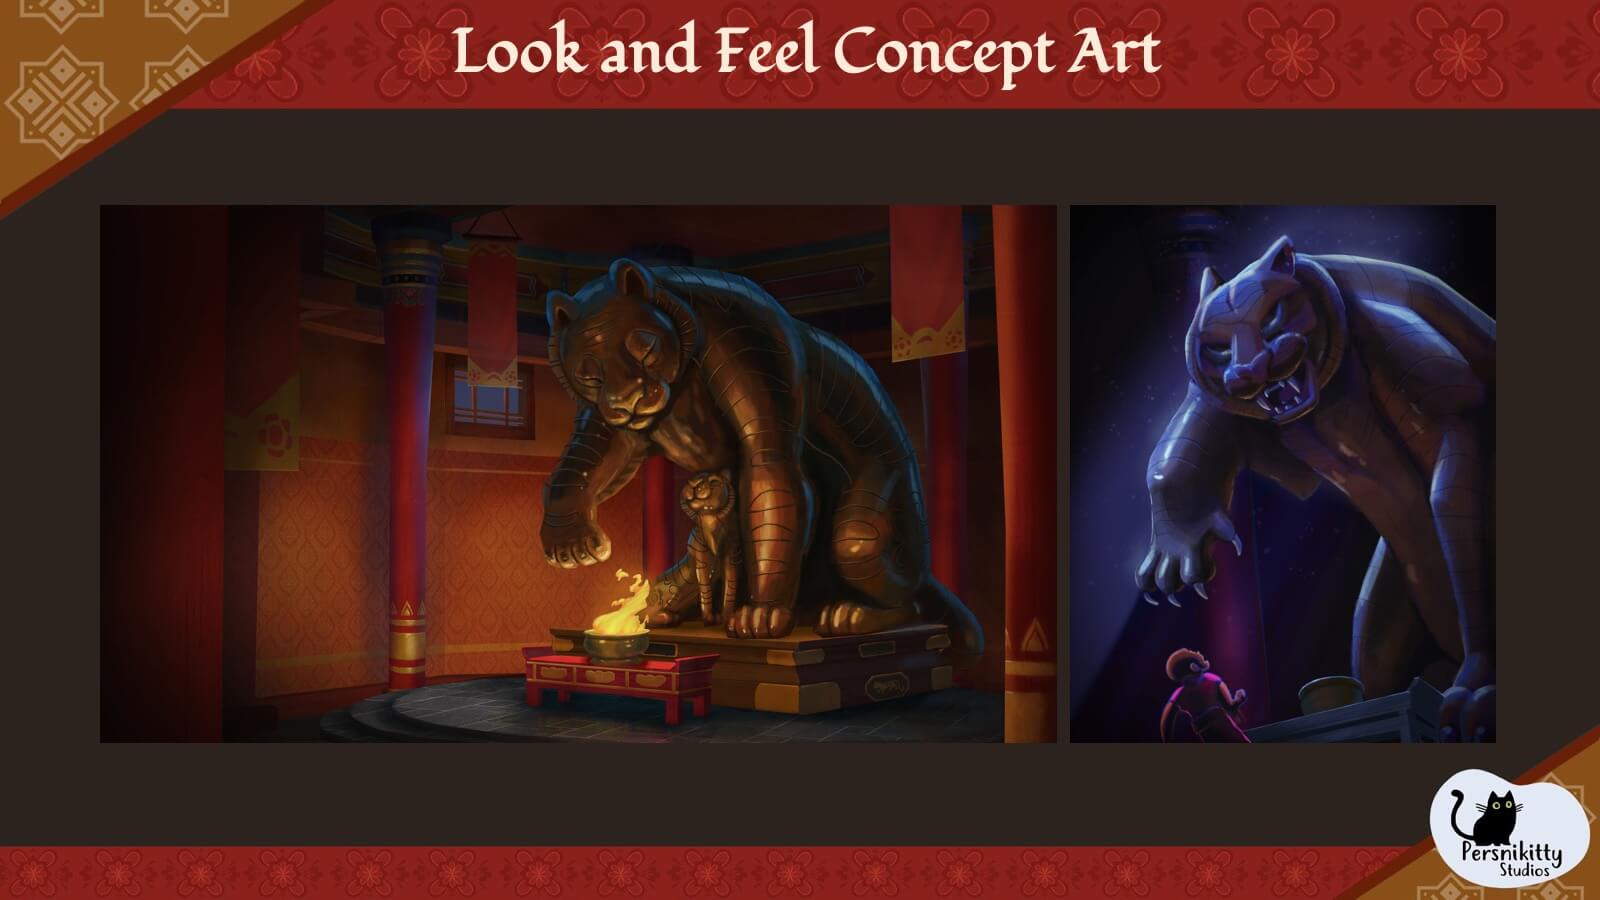 A slide of "look and feel" concept art from the film.